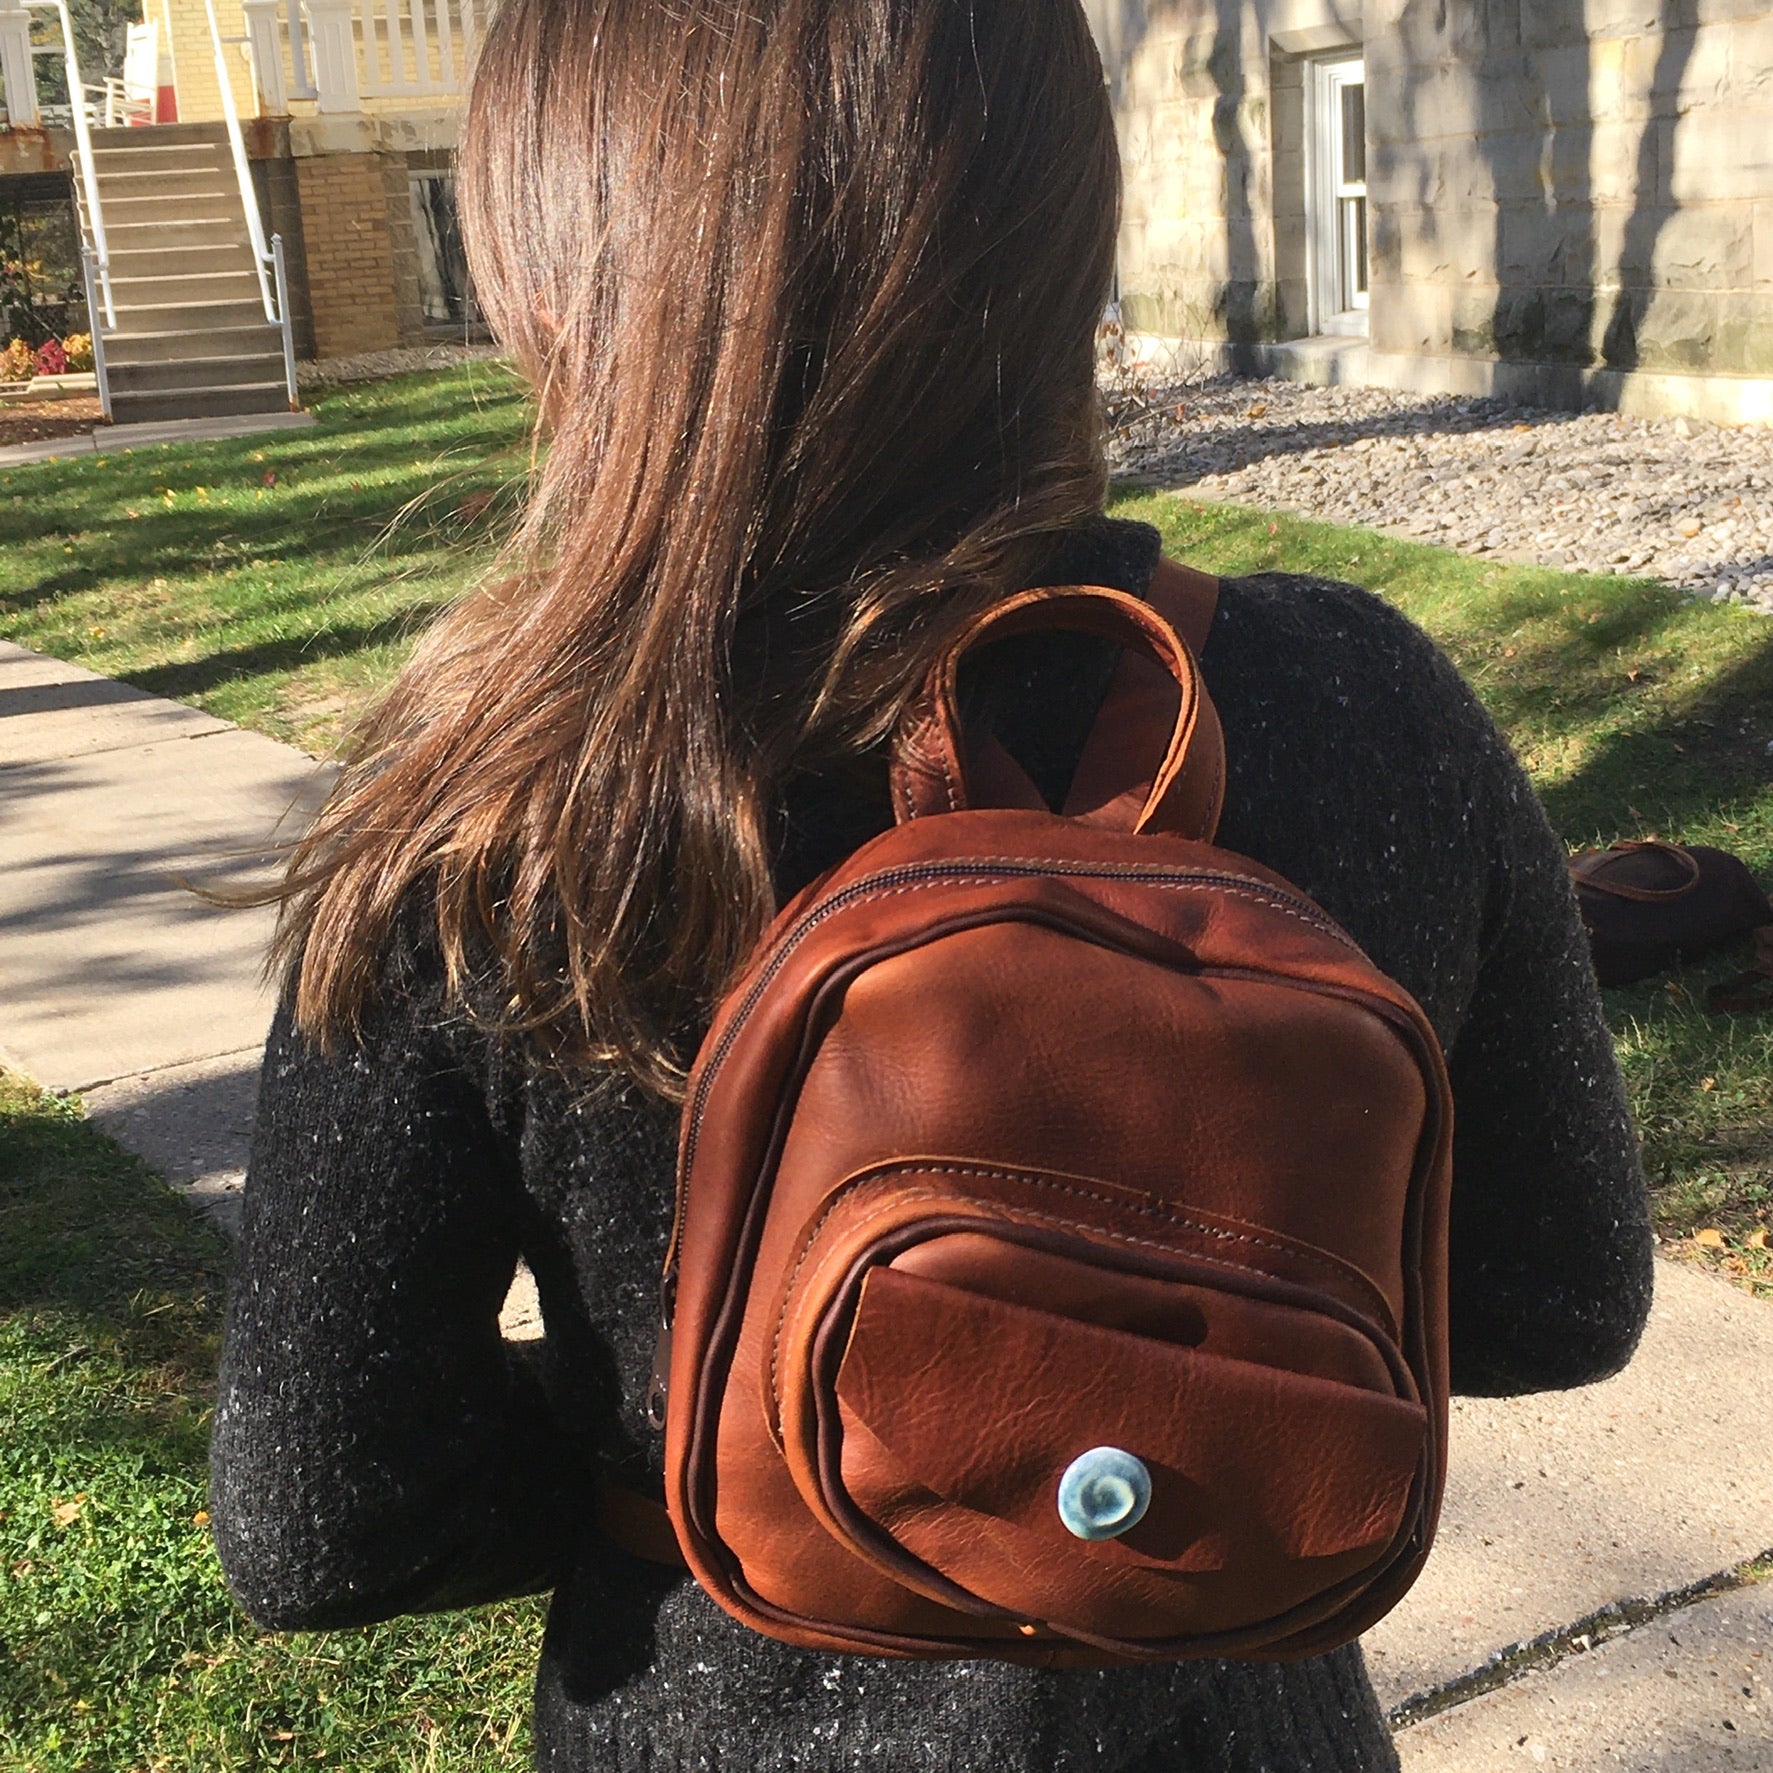 Amazon.com: Womens Small Backpack Brown